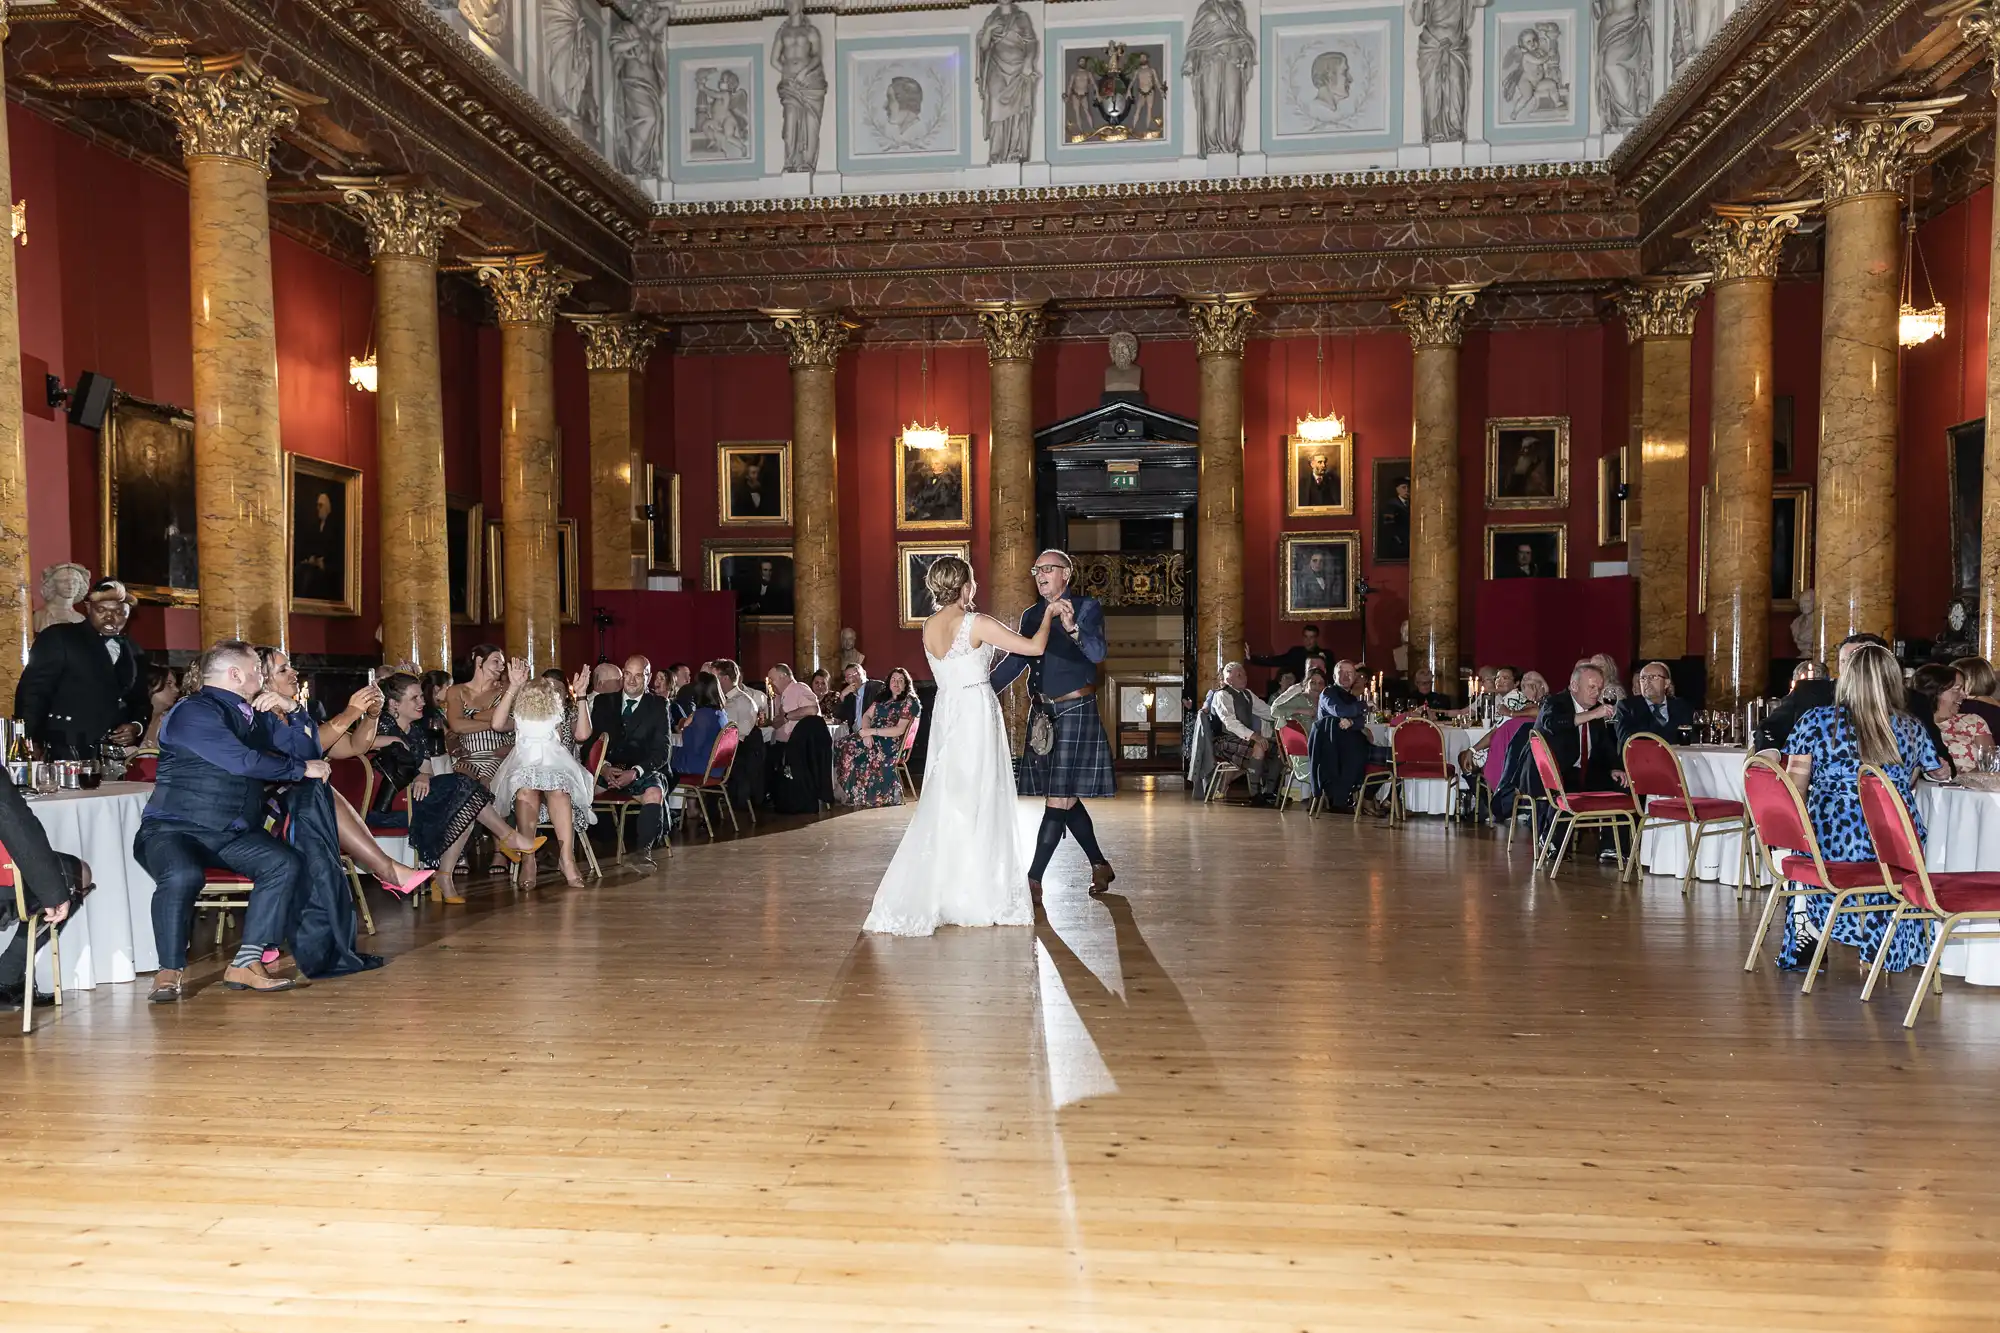 A couple in formal attire, a wedding gown, and a kilt, dances in the center of a large, ornate hall with guests seated around the edges, watching.